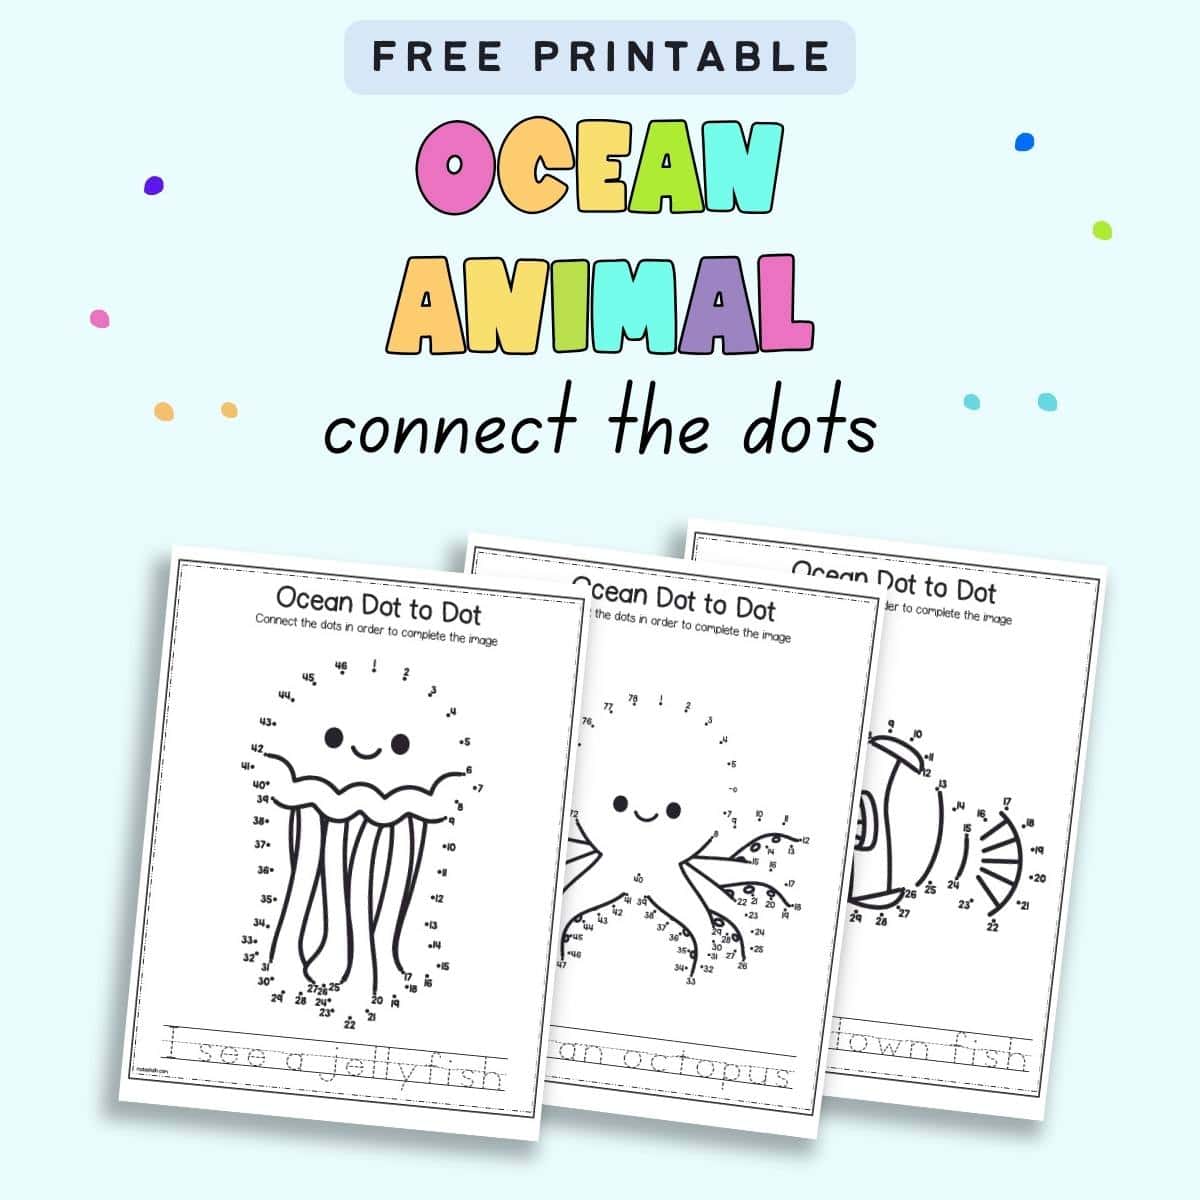 Text "free printable ocean animal connect the dots" with a. preview of three connect the dots pages. Animals featured include a jellyfish, an octopus, and a clown fish.